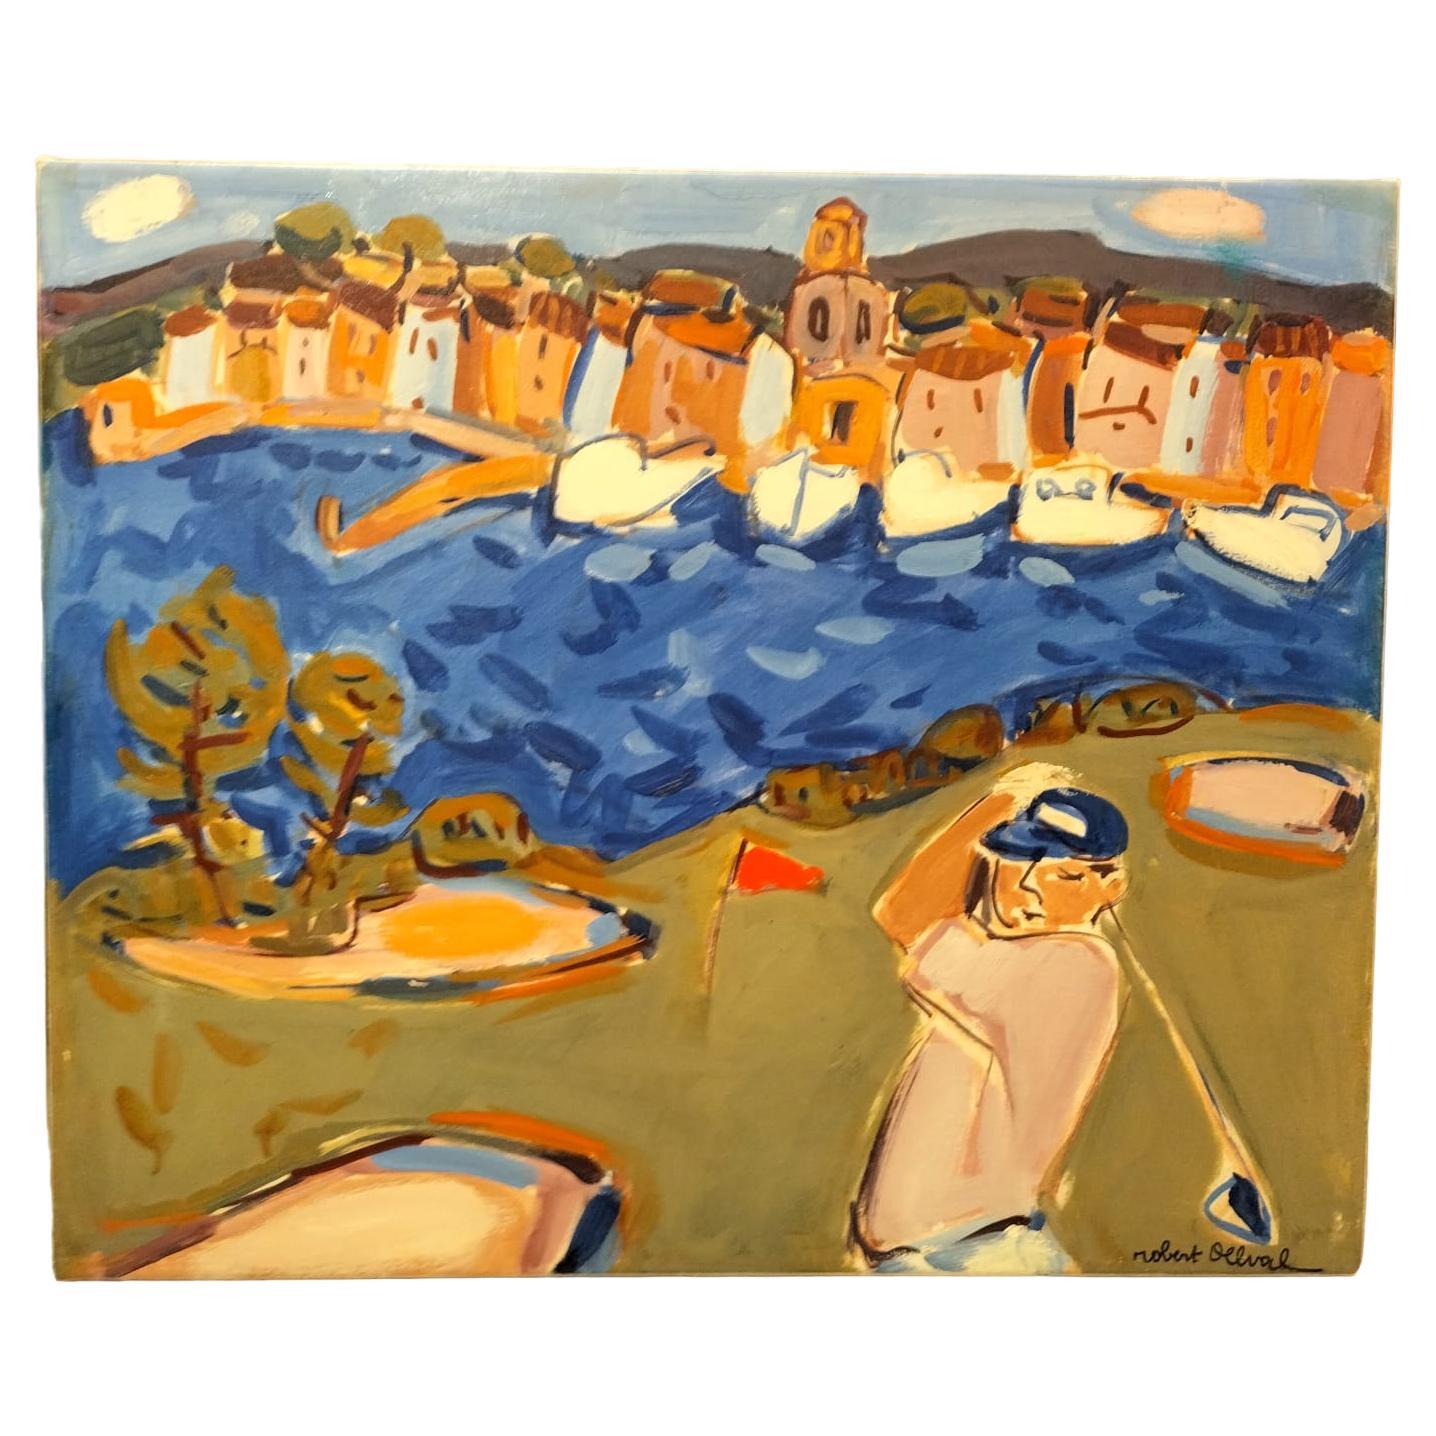 Oil-on-Canvas Painting 'Golf in Saint Tropez' by Robert Delval (1934-) For Sale